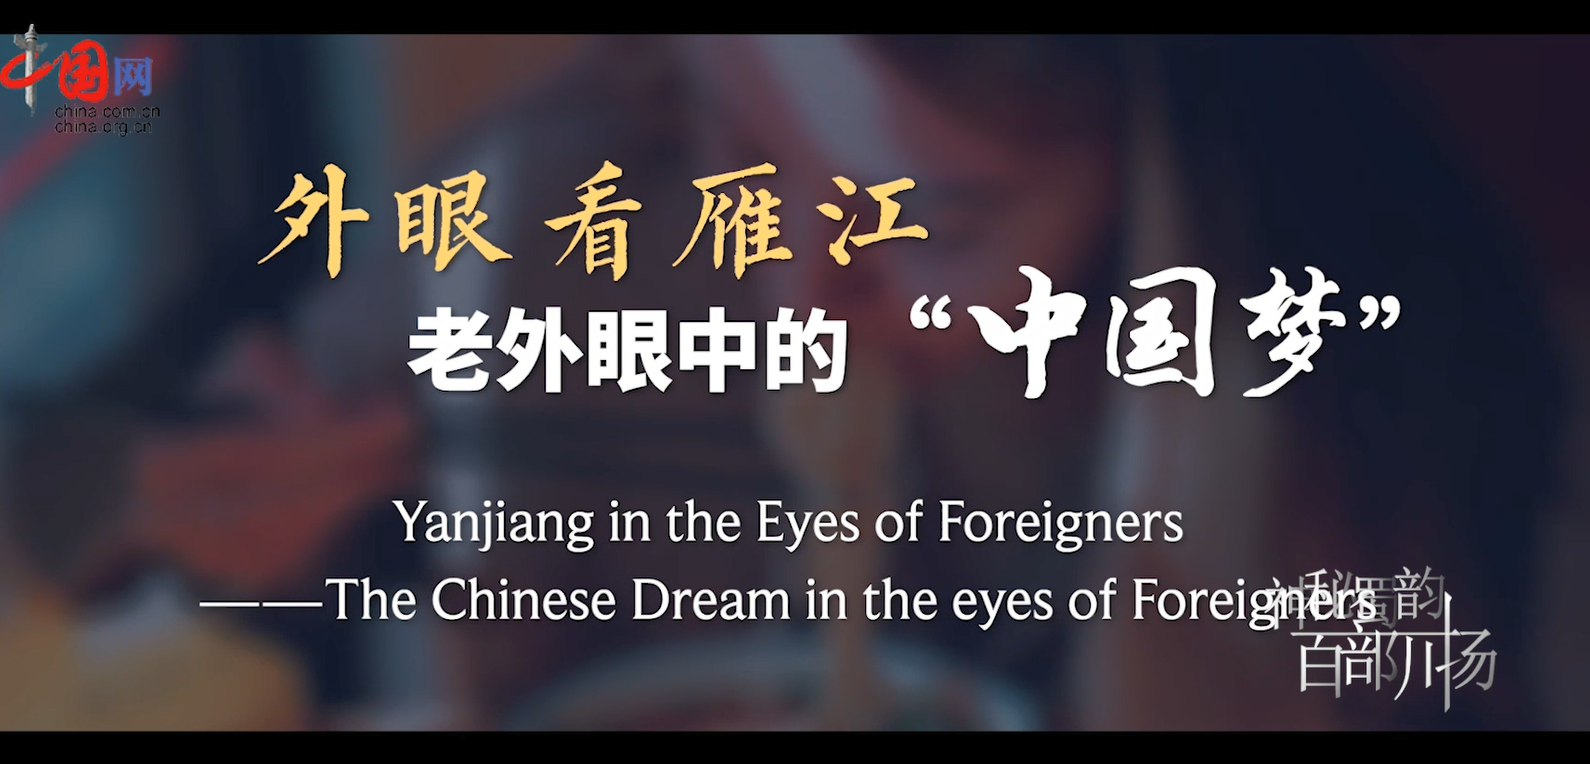 Yanjiang in the Eyes of Foreigners---The Chinese Dream in the eyes of Foreigners